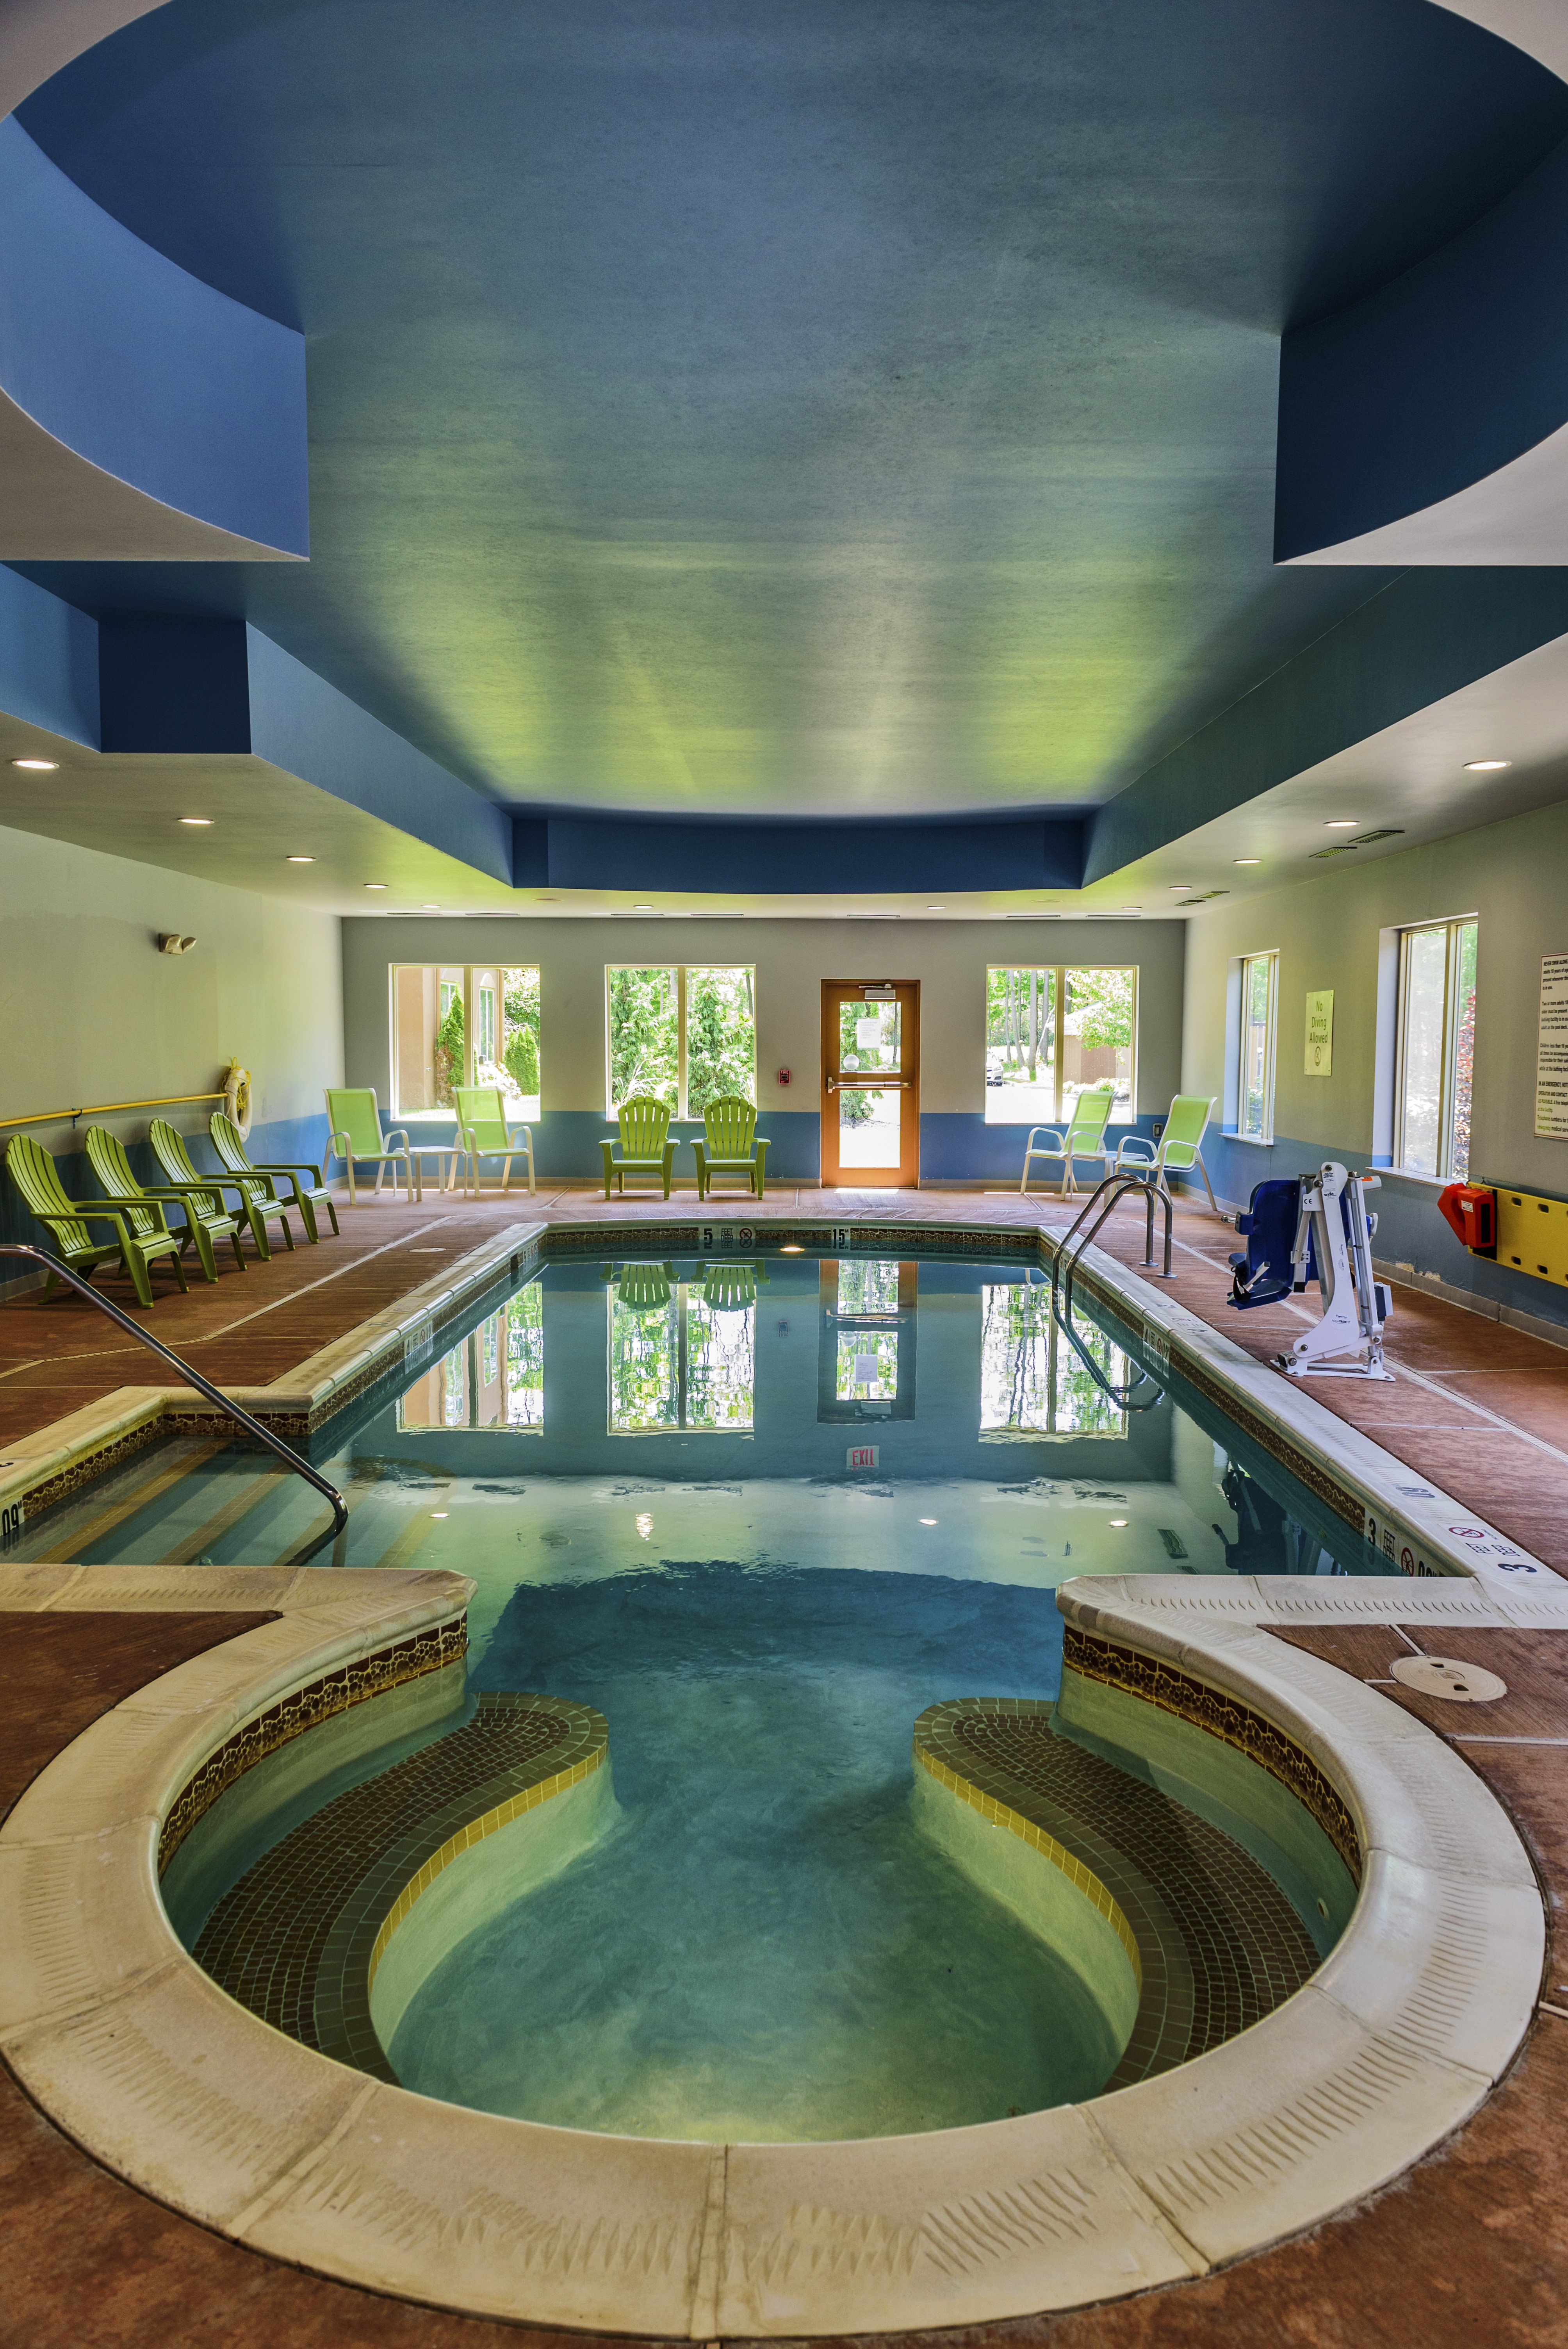 ENJOY A SWIM IN THE POOL OR RELAX IN THE WADING AREA